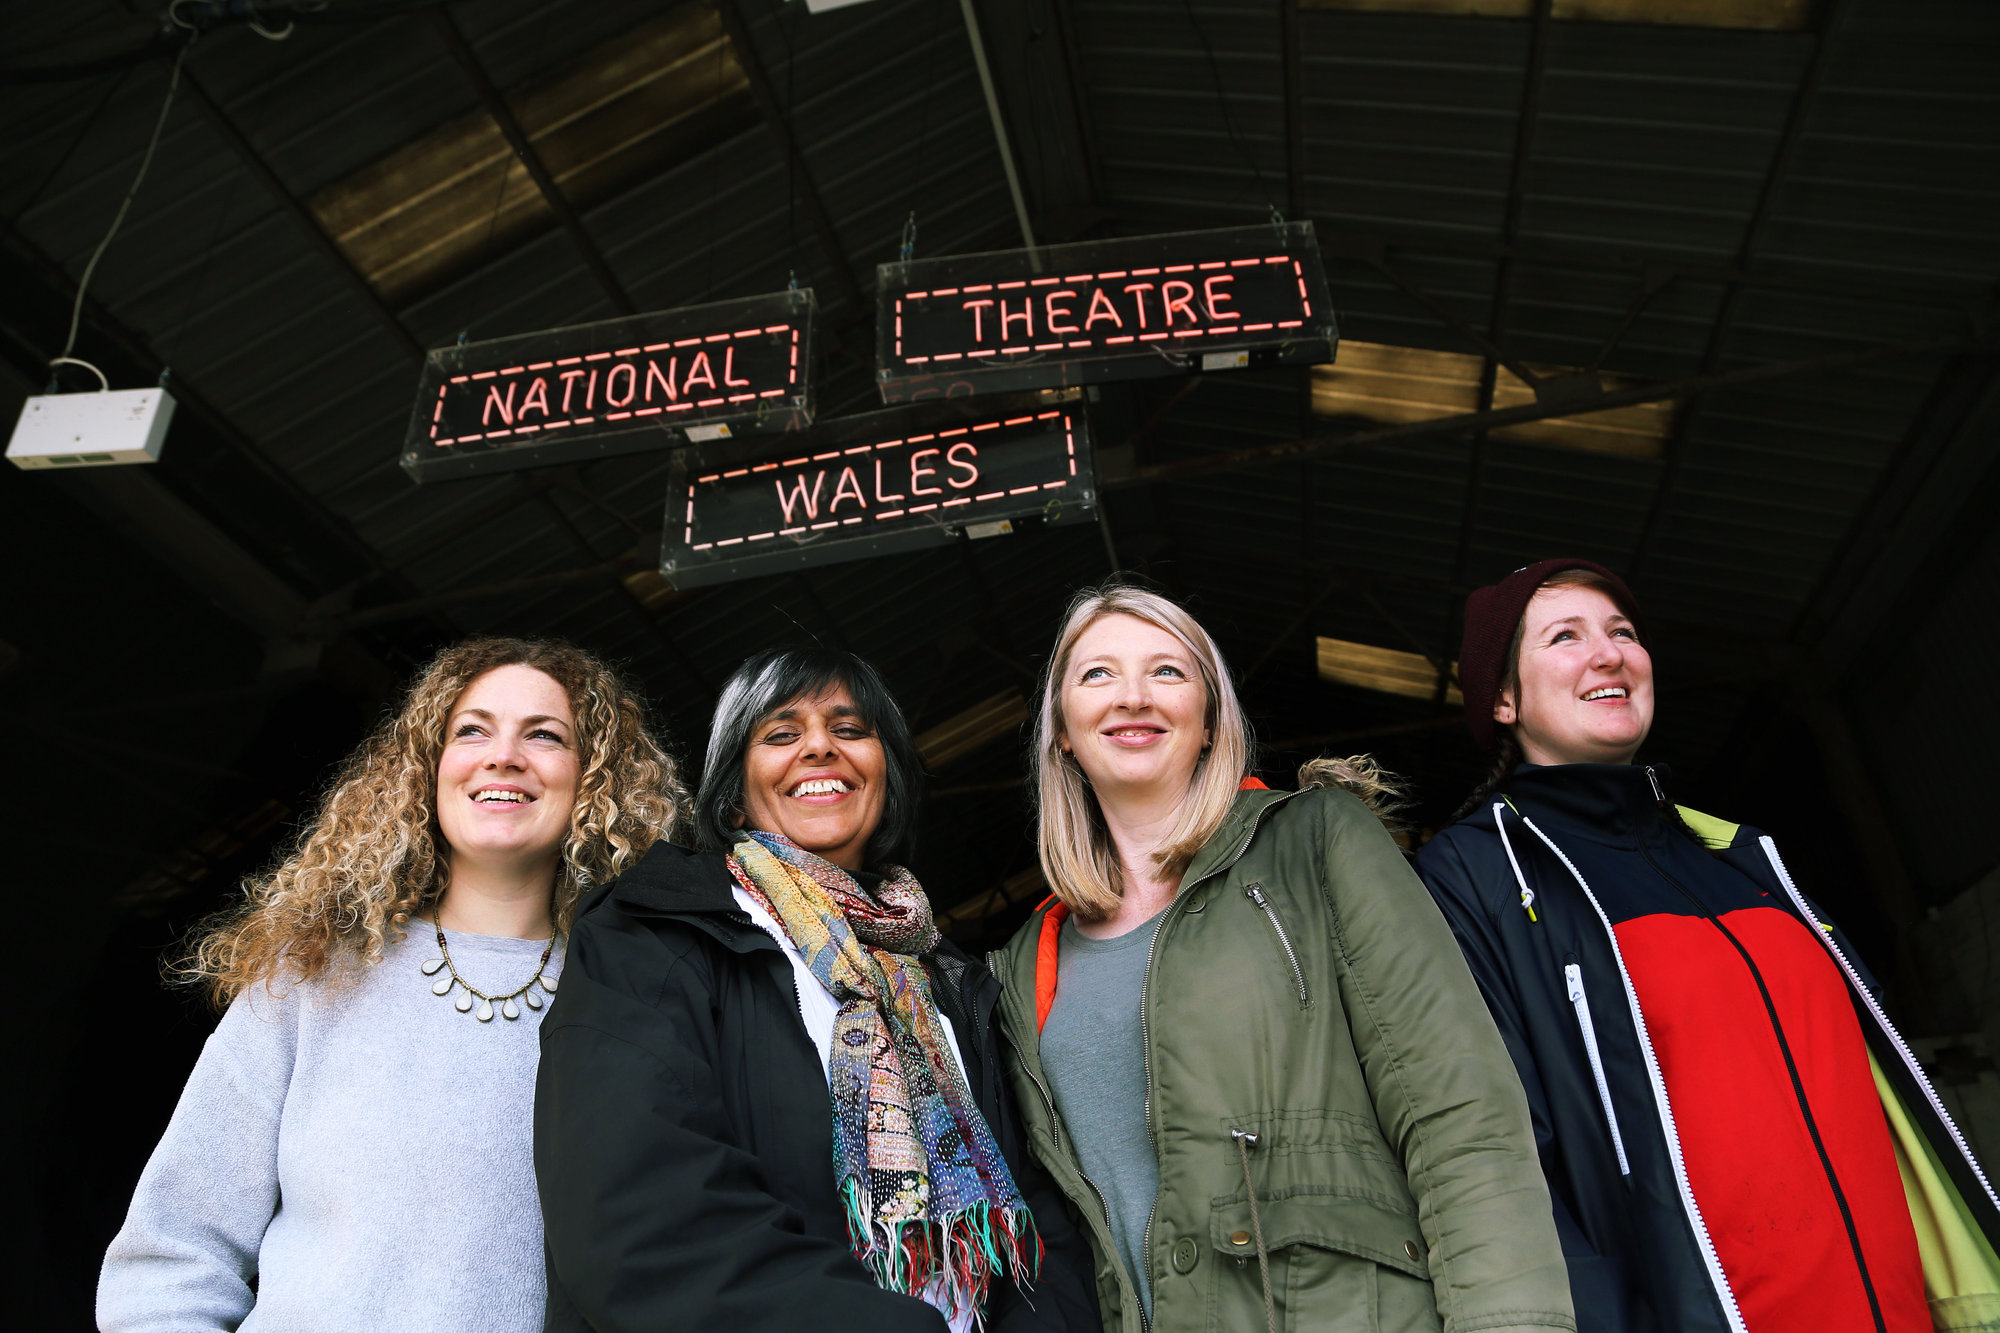 Pictured L-R: Co-director Evie Manning, artistic director Kully Thiarai, writer Rachel Trezise and co-director Rhiannon White Re: Press rehearsal of "We'Re Still Here", a play created by Rachel Trezise, Common Wealth and the National Theatre Wales about steelworkers, which will be performed in Byass Works, a disused industrial unit, in Port Talbot, south Wales, UK.